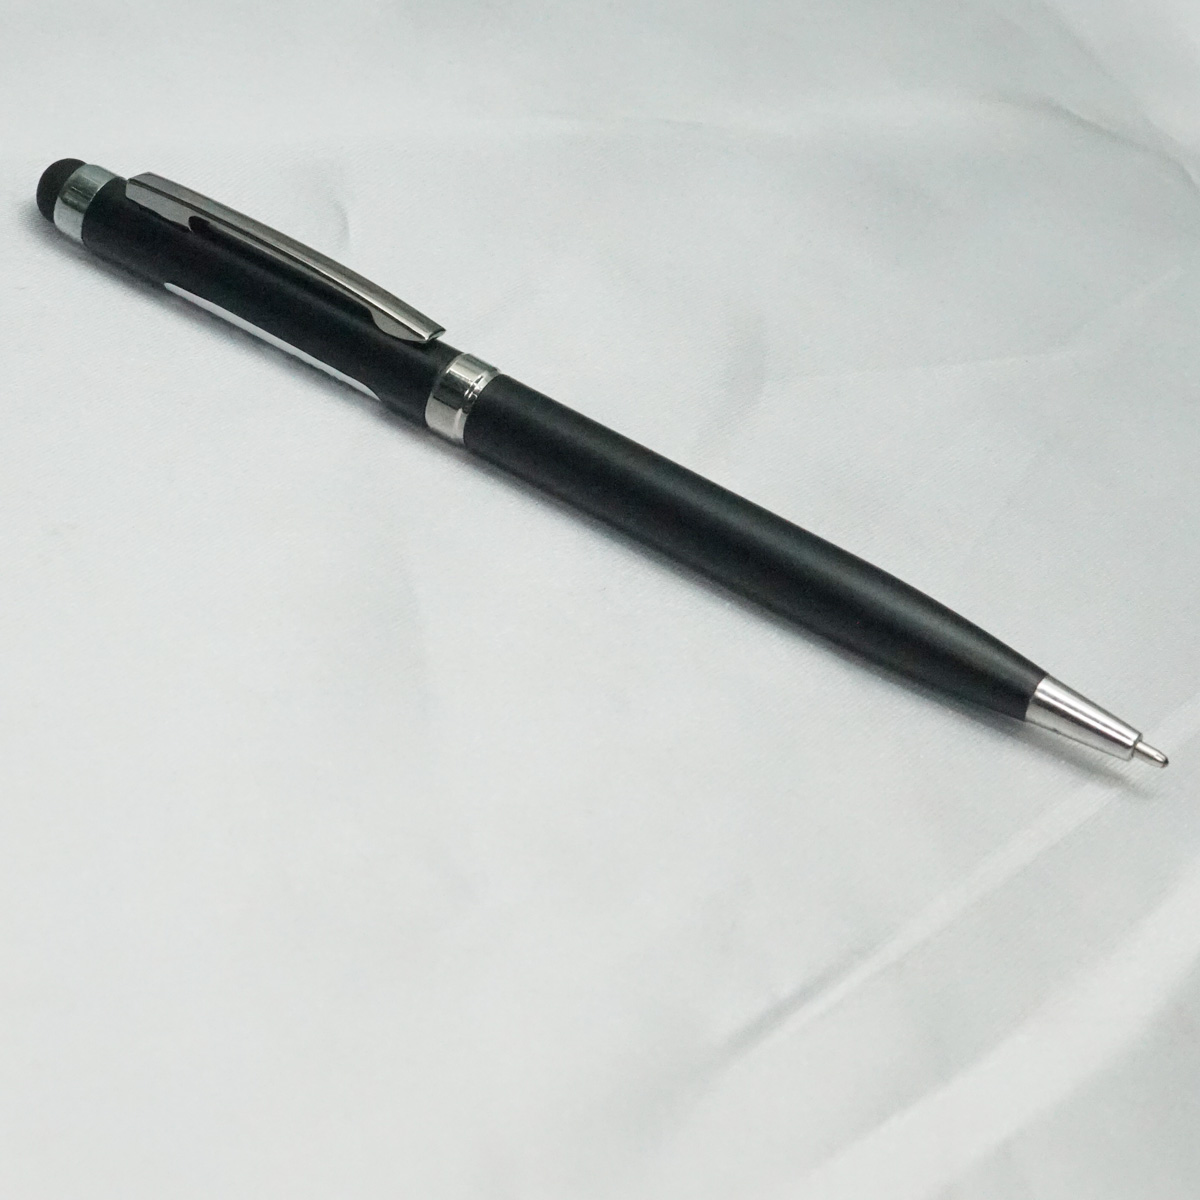 Penhouse.in Black Color Body With Siver Clip and Silver Trims Top on Stylus Medium Tip Twist Type Ball Pen SKU 21973